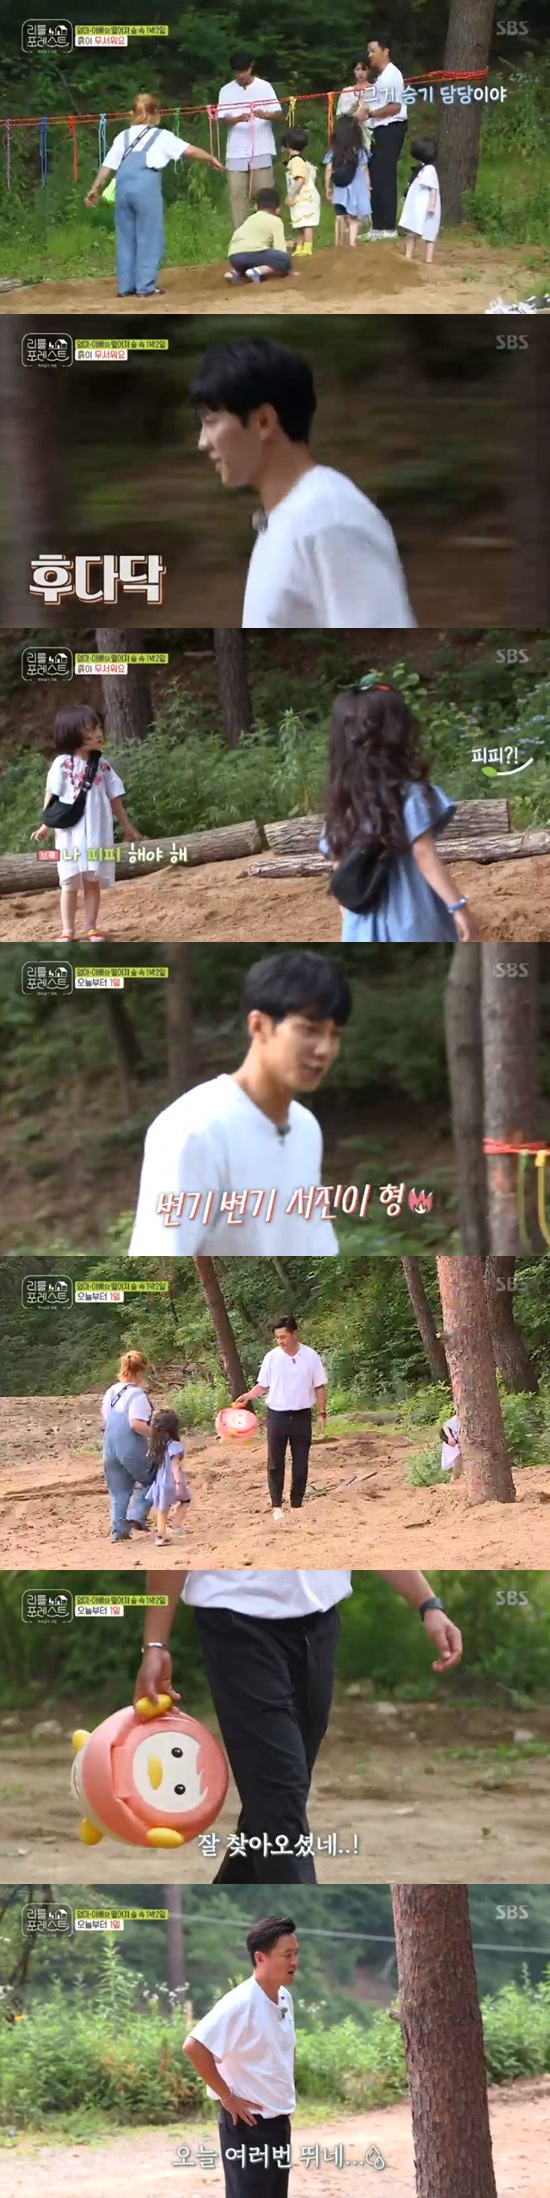 Lee Seo-jin and Lee Seung-gi-gi-gis extraordinary division of labor drew laughter.Lee Seung-gi-gi-gi was in charge of the rest and Lee Seo-jin became in charge of the toilet in SBS Little Forest, which was broadcast on August 19.Lee Seo-jin, Lee Seung-gi-gi-gi, Park Na-rae, and Jeong So-min played sand with Kang Yi-han (7) Brook (5) Grace (5) Mai-hyun (4) Choi Yoo-jin (4).Lee Seung-gi-gi-gi took off his shoes and made them play with socks, and Park played with sand making toad houses.Then the children wanted to go to the bathroom and said, ShhhhhhhhhhhhhhhhhhhhhhhhhhhhhhhhhhhhhhhhhhhhhhhhhhhhhhhhhhhhhhhhhhhhLee Seung-gi-gi-gi took Mai-hyun to solve the problem, saying, Shut up a minute. Then, when the twins Brooke and Grace tried to Peepe, Park Na-rae stepped up.Brooke solved it outdoors, but Grace found the toilet, and when Park said, I think I should bring the Grace toilet, Lee Seung-gi-gi Gi asked, Please bring me the Seojin toilet. Lee Seo Jin struggled to find Graces toilet.Yoo Gyeong-sang